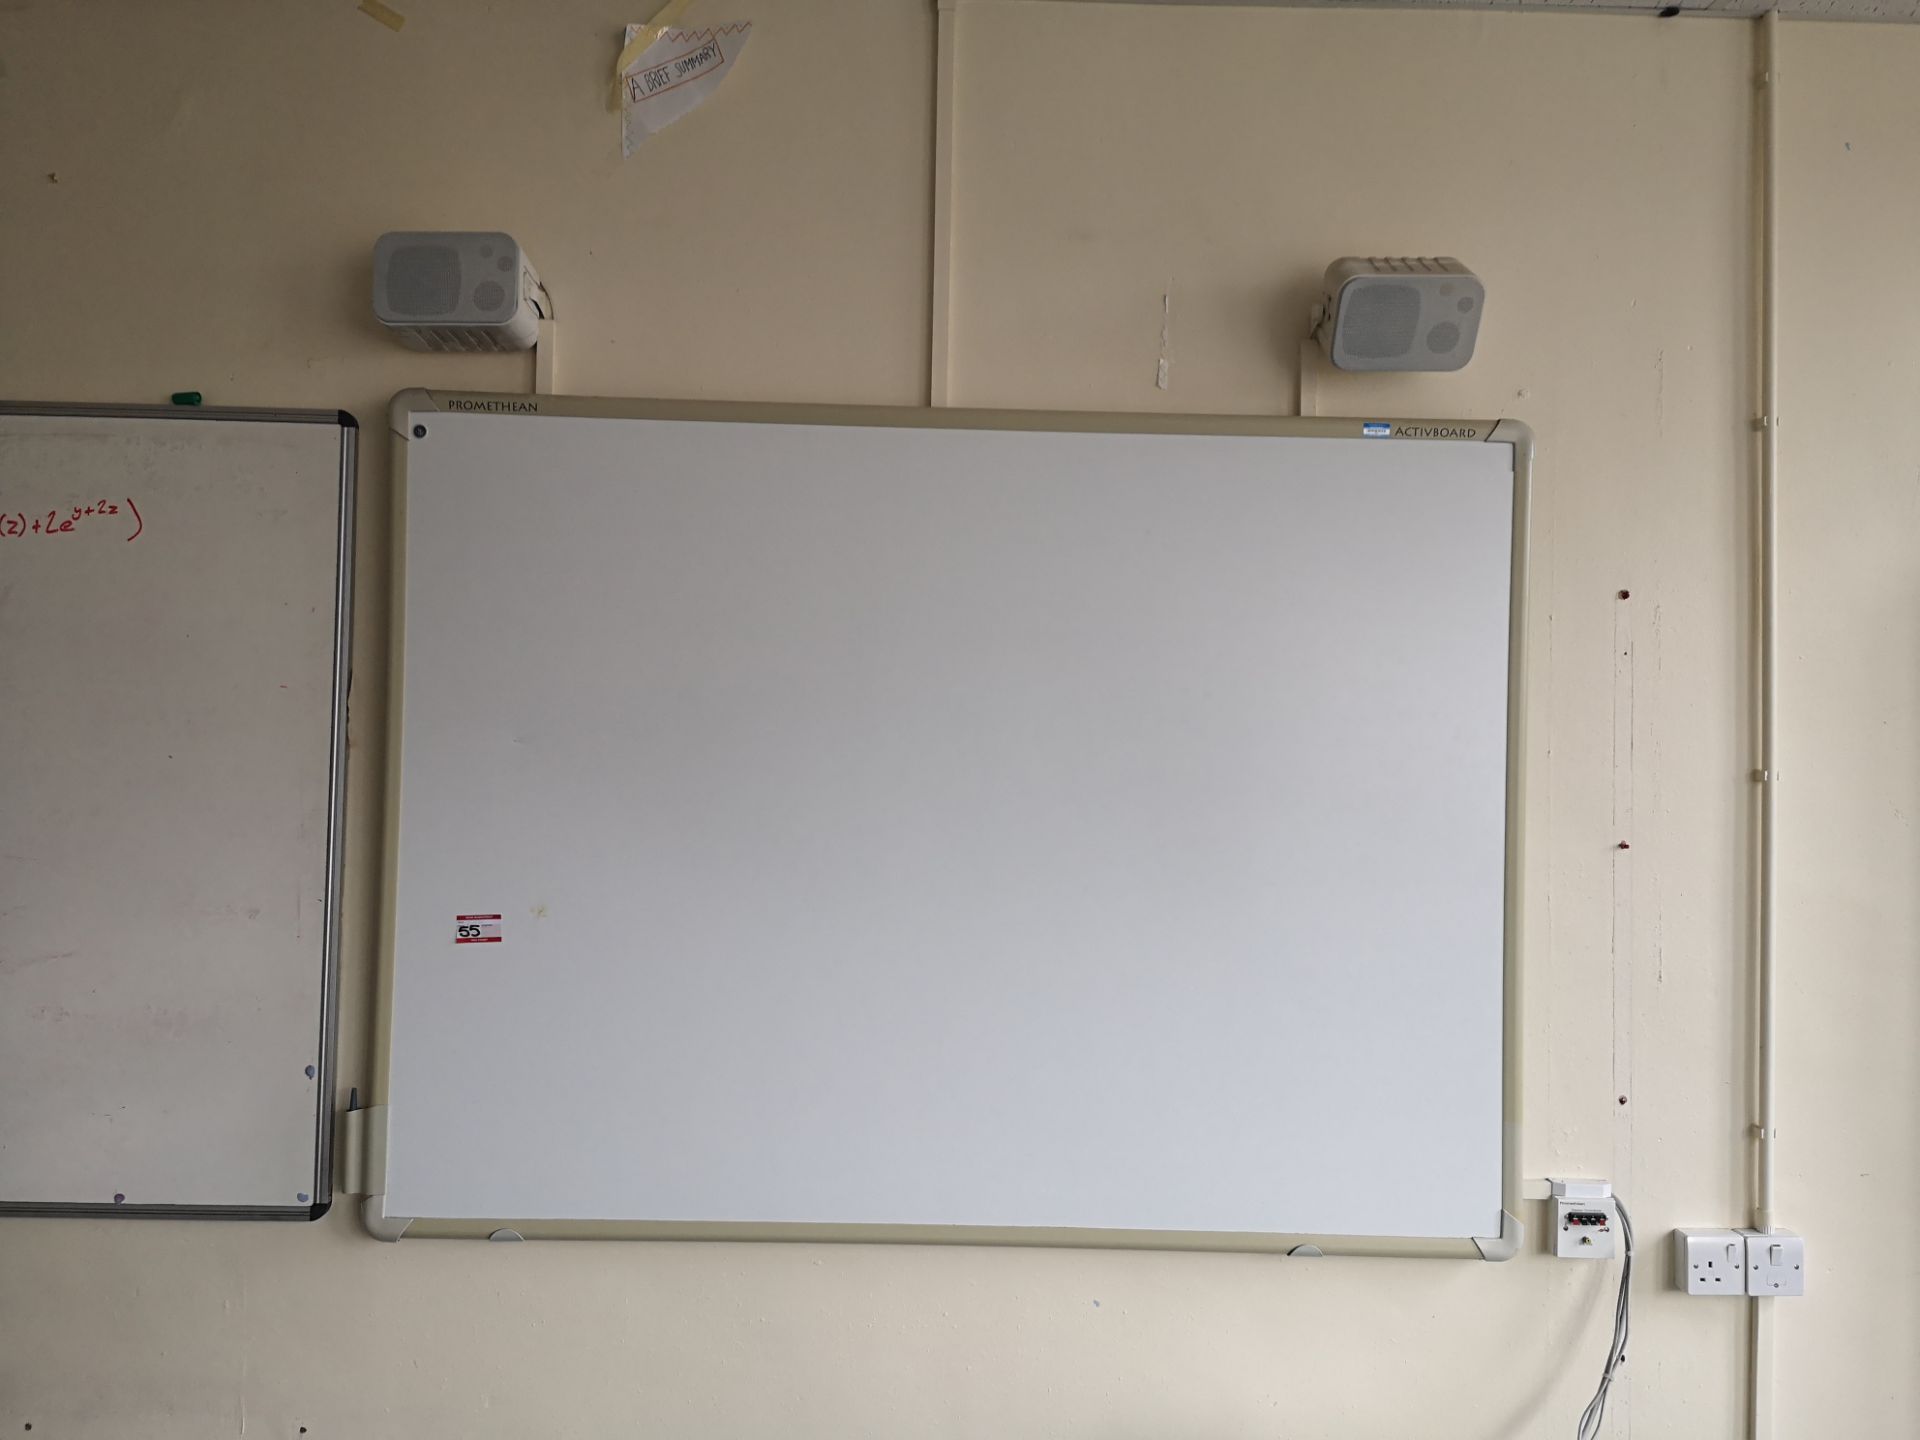 Promethean active board with speakers